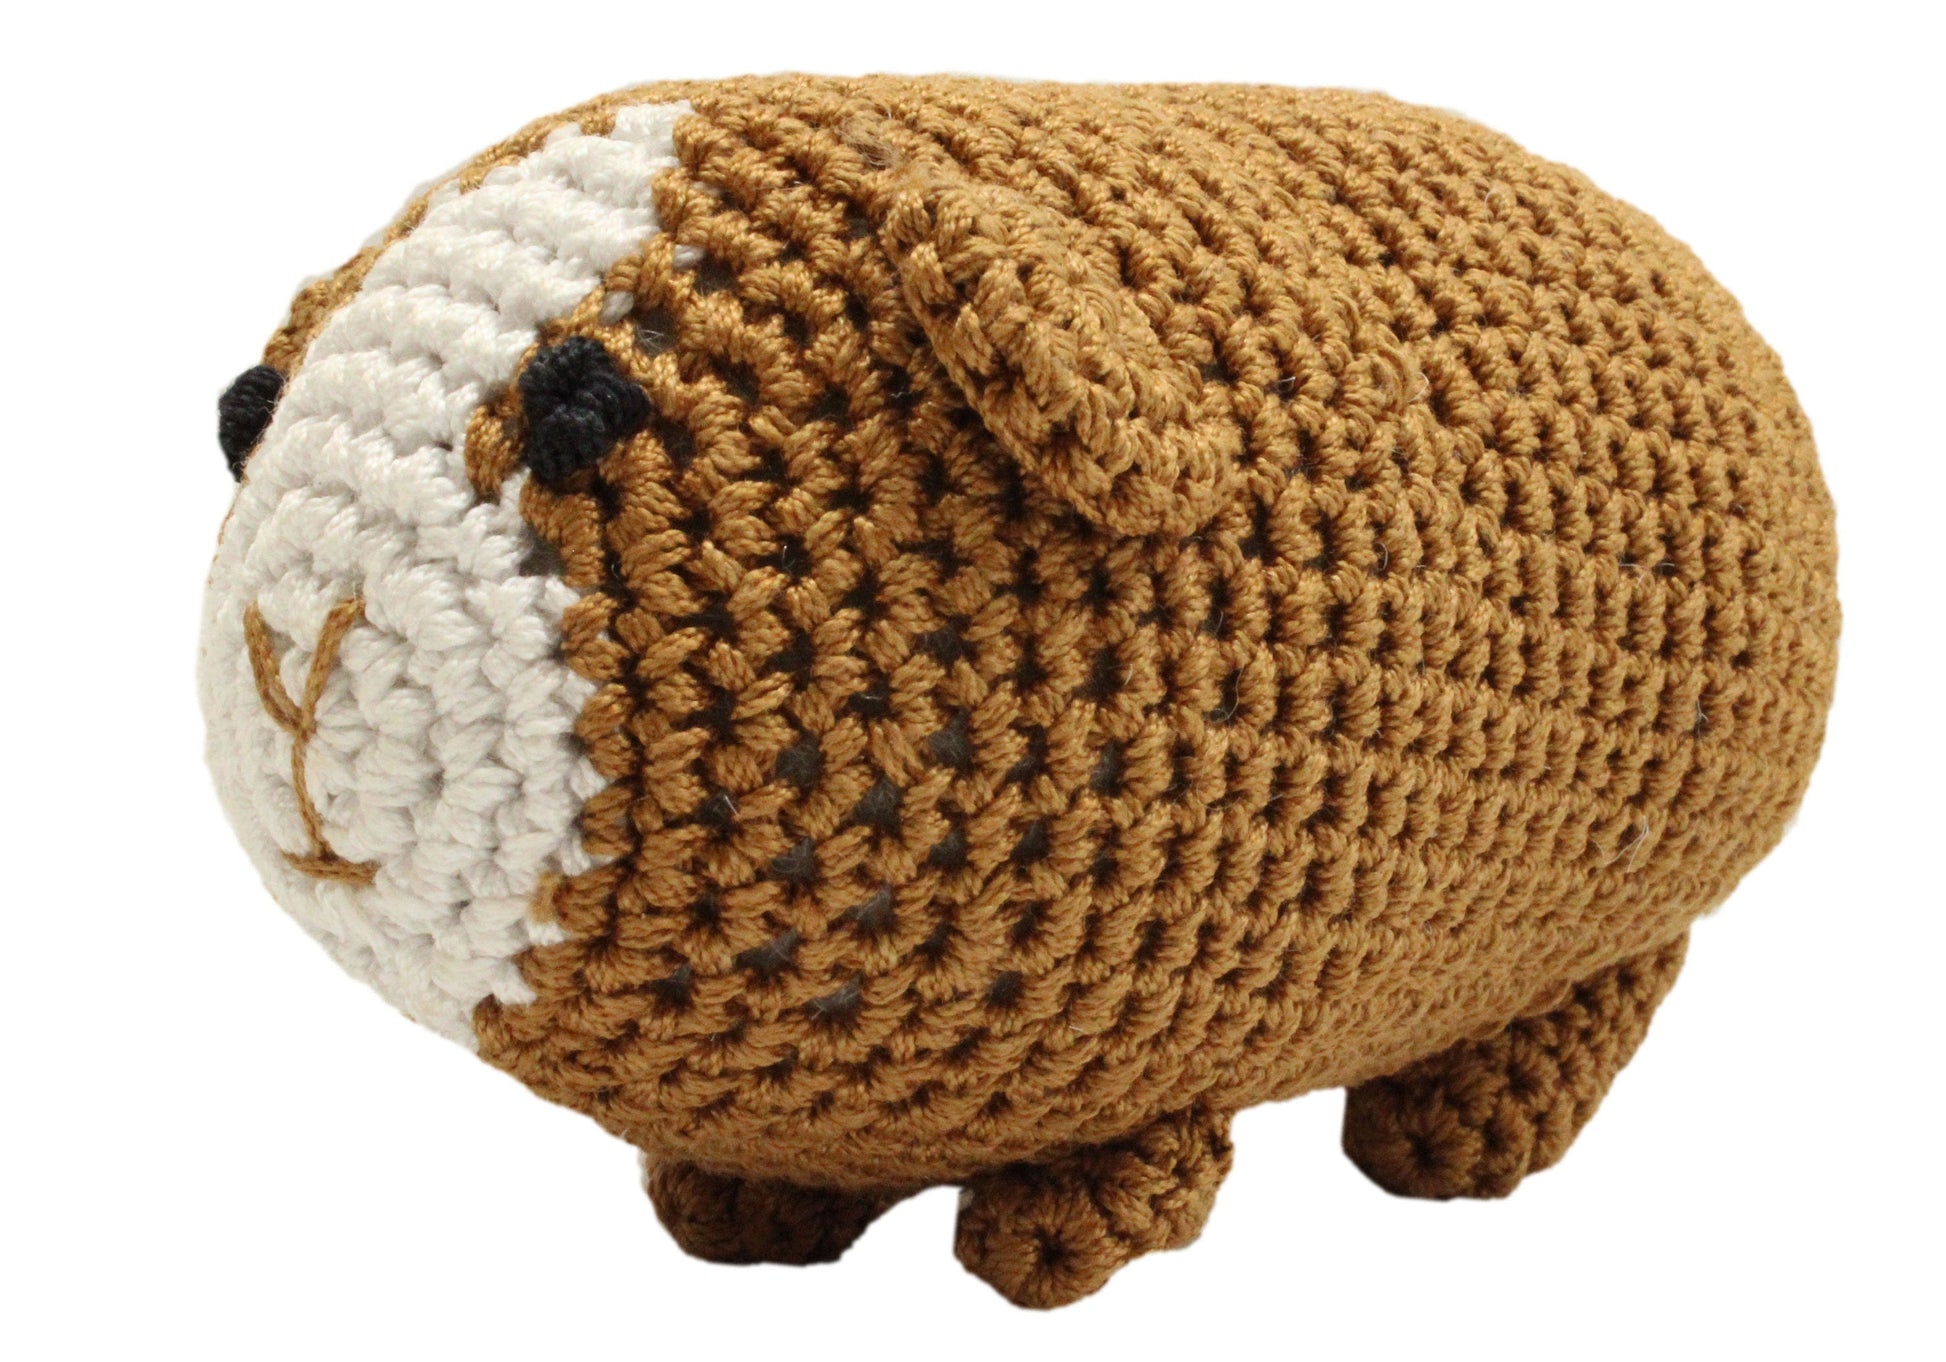 Knit Knacks Organic Cotton Pet, Dog Toys (Choose from: Pig, Fox, Owl, Guinea Pig or Triceratops)-3